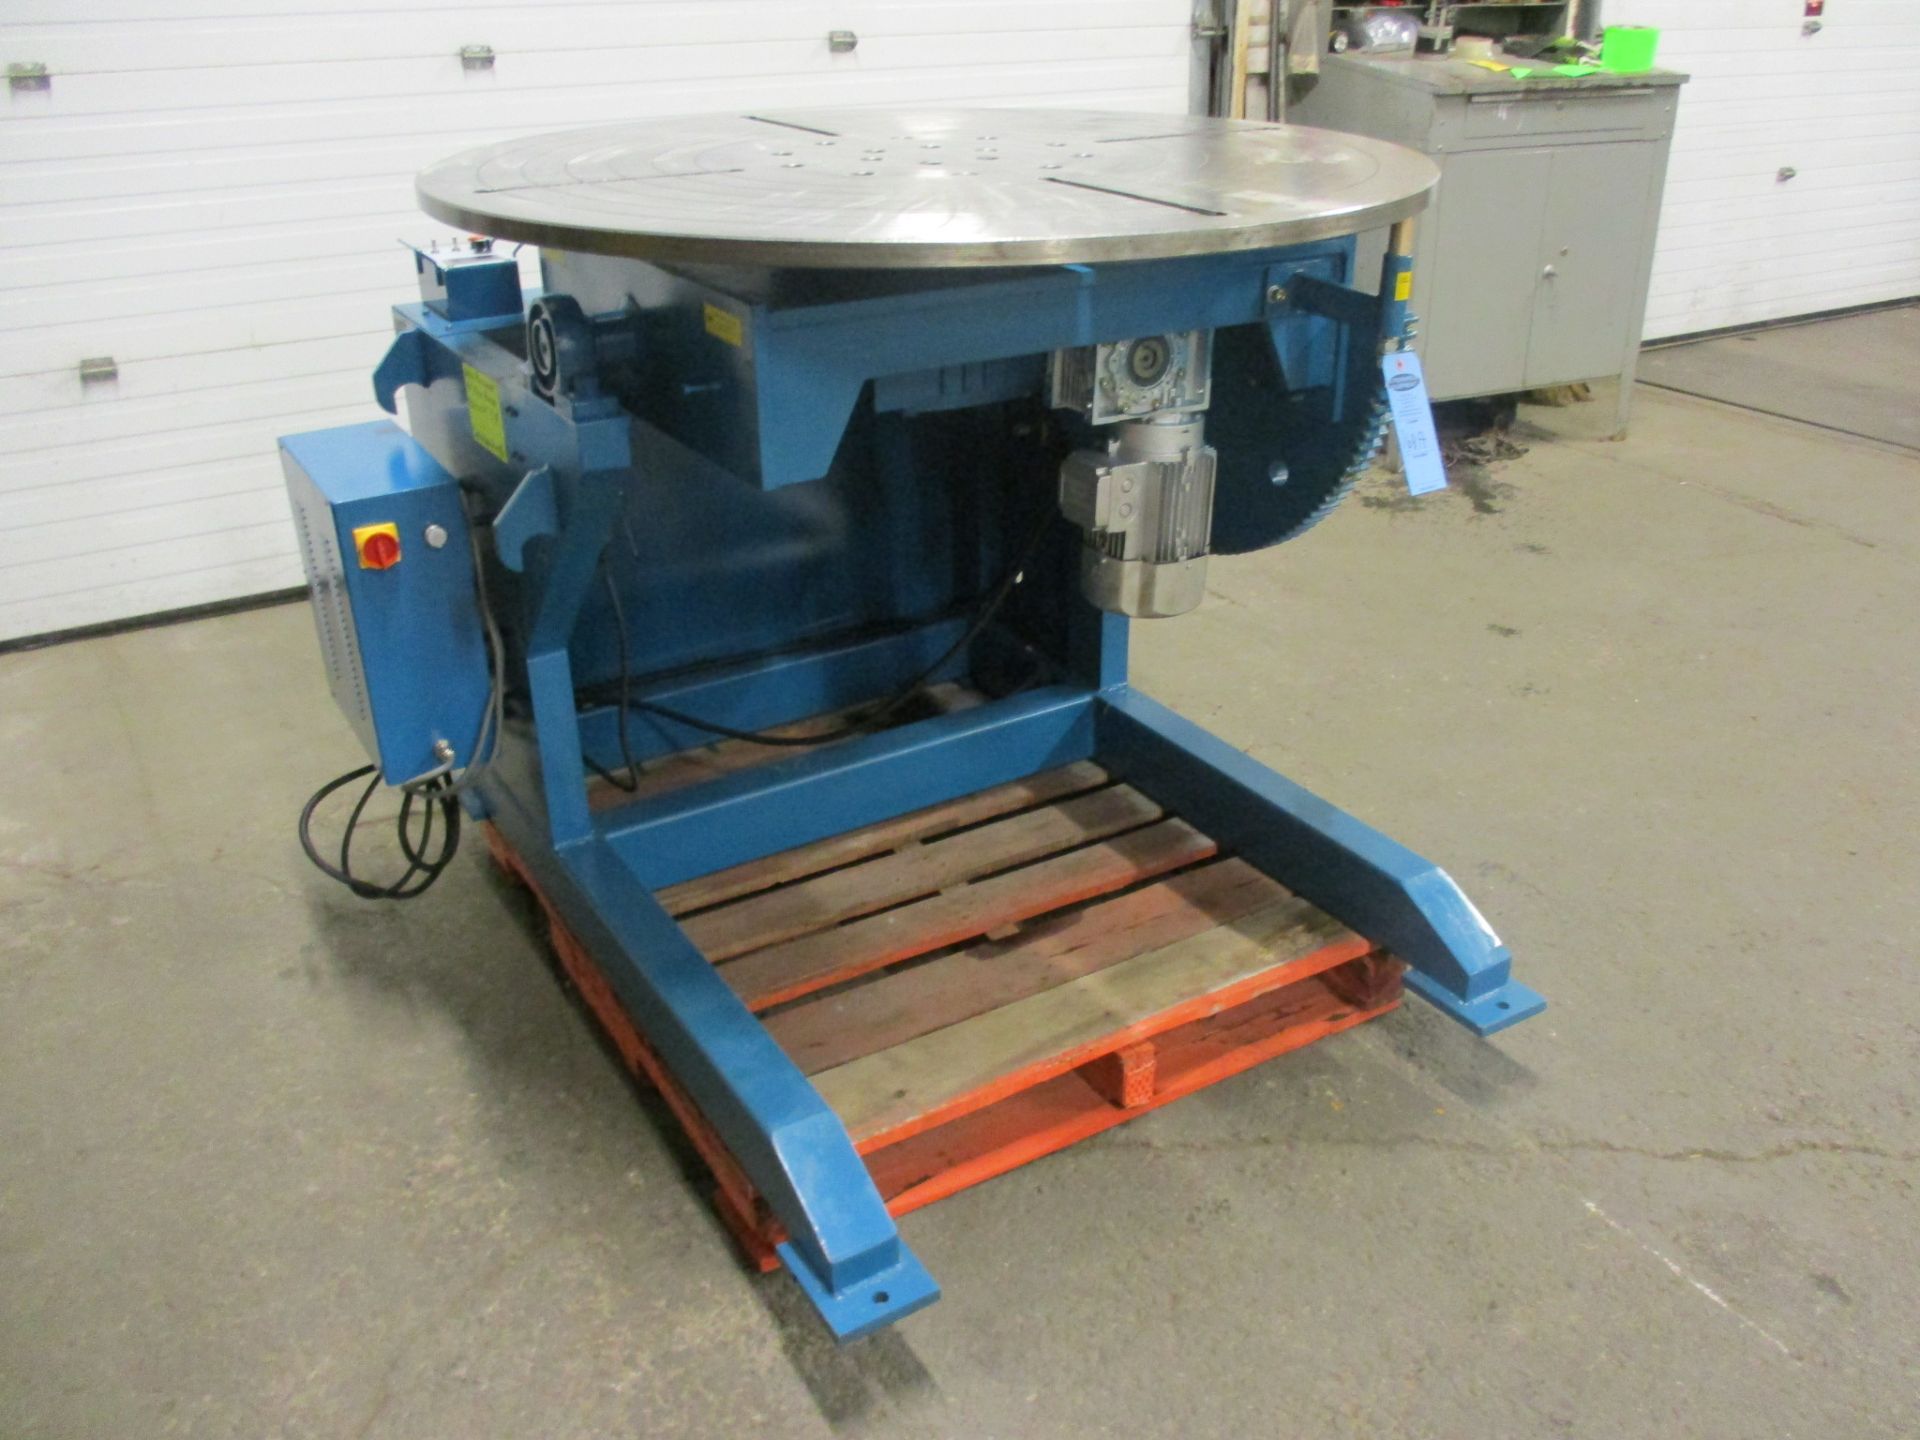 Verner model VD-3000 WELDING POSITIONER 3000lbs capacity - tilt and rotate with variable speed drive